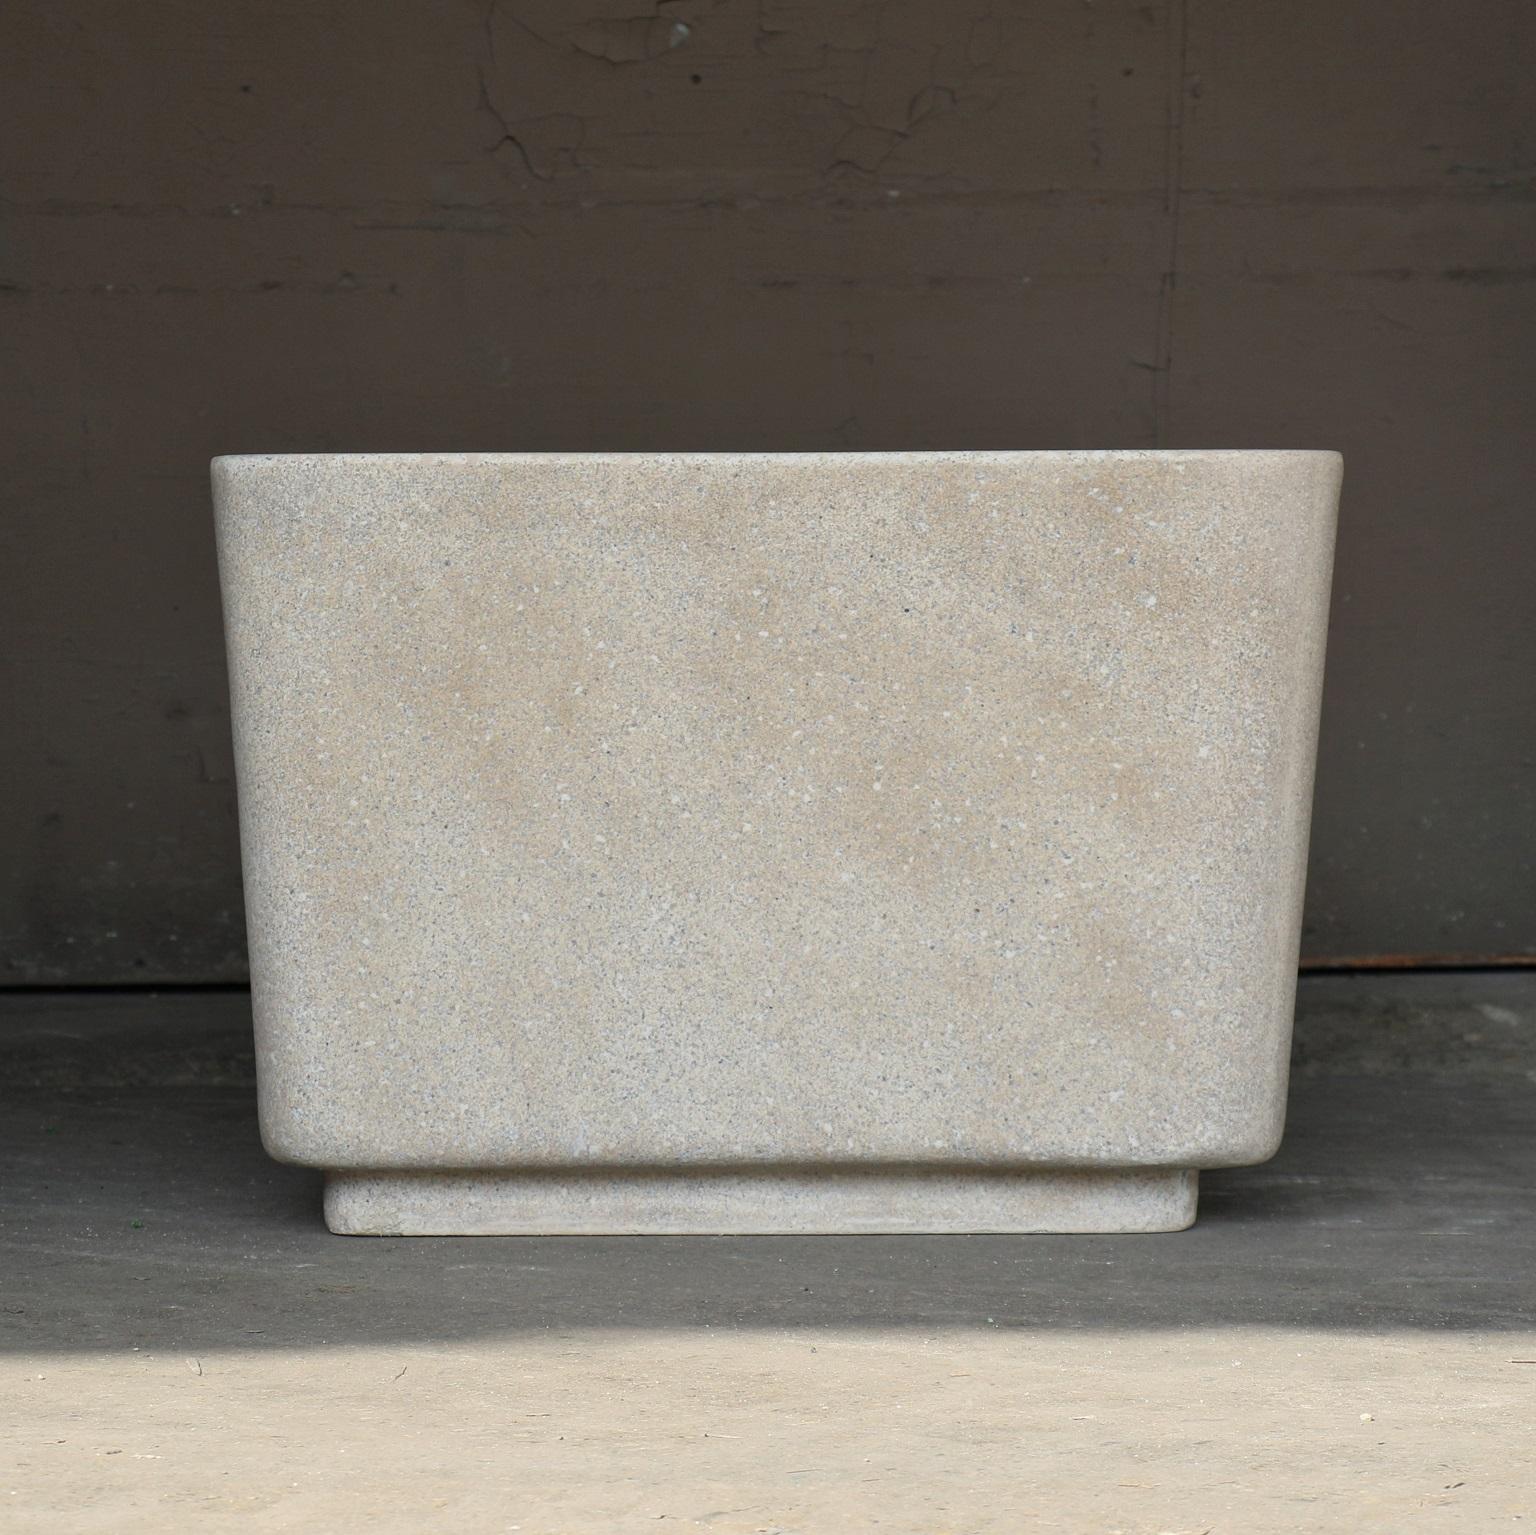 Rounded edges form a continuous plane, juxtaposing rigid structural expectation with an infinite expanse. A reliable, welcoming presence.

Dimensions: Width 25 in. (63.5 cm), depth 25 in. (63.5 cm), height 17 in. (43.2 cm). Weight 35 lbs. (15.9